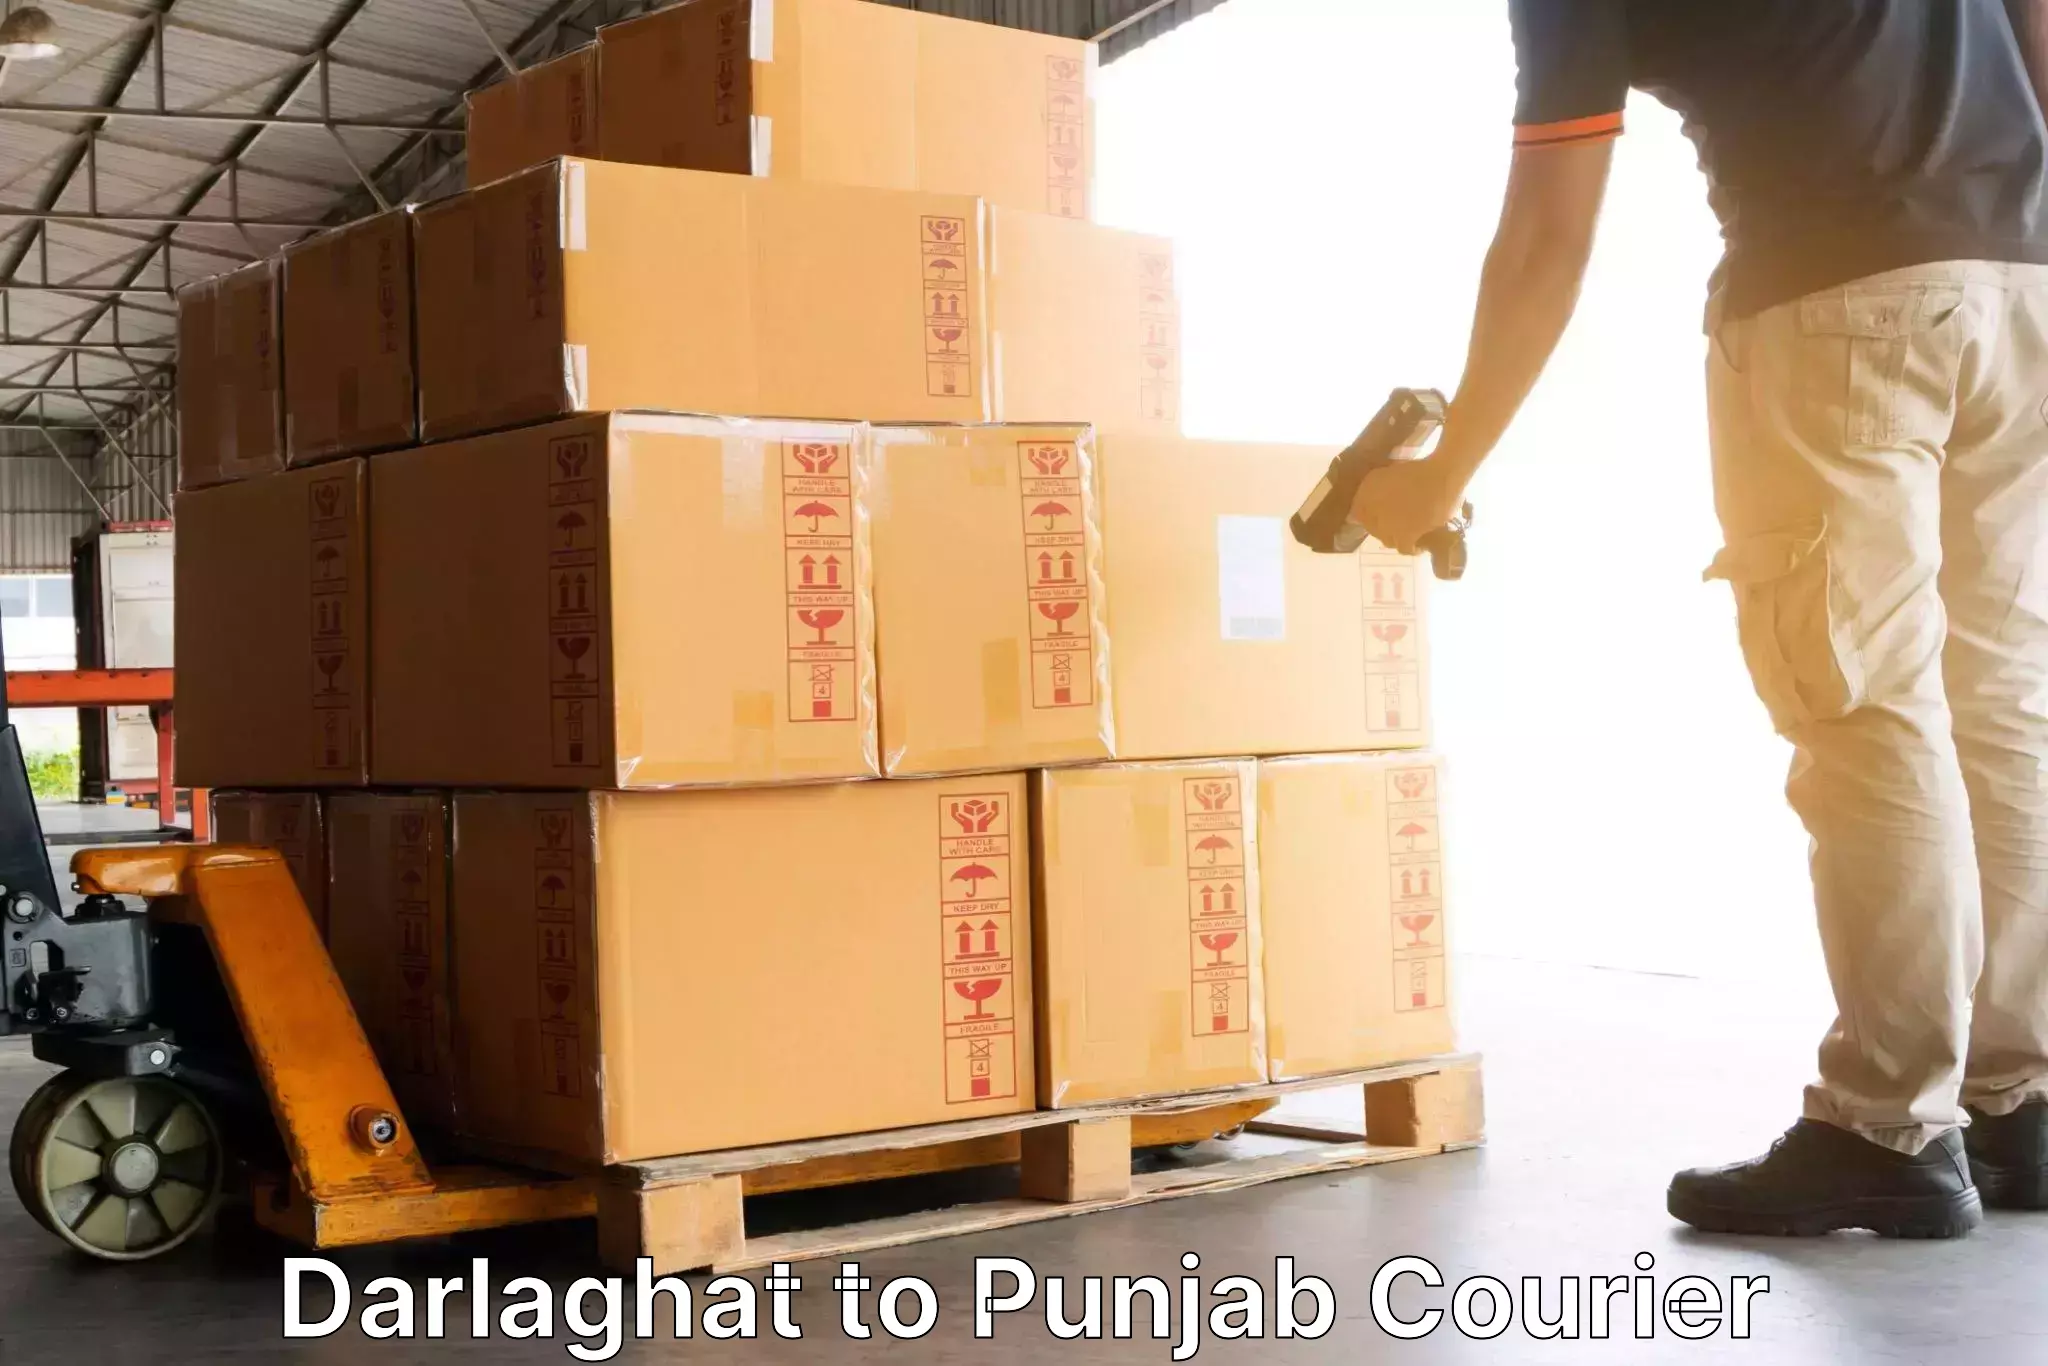 On-time delivery services Darlaghat to Rajpura